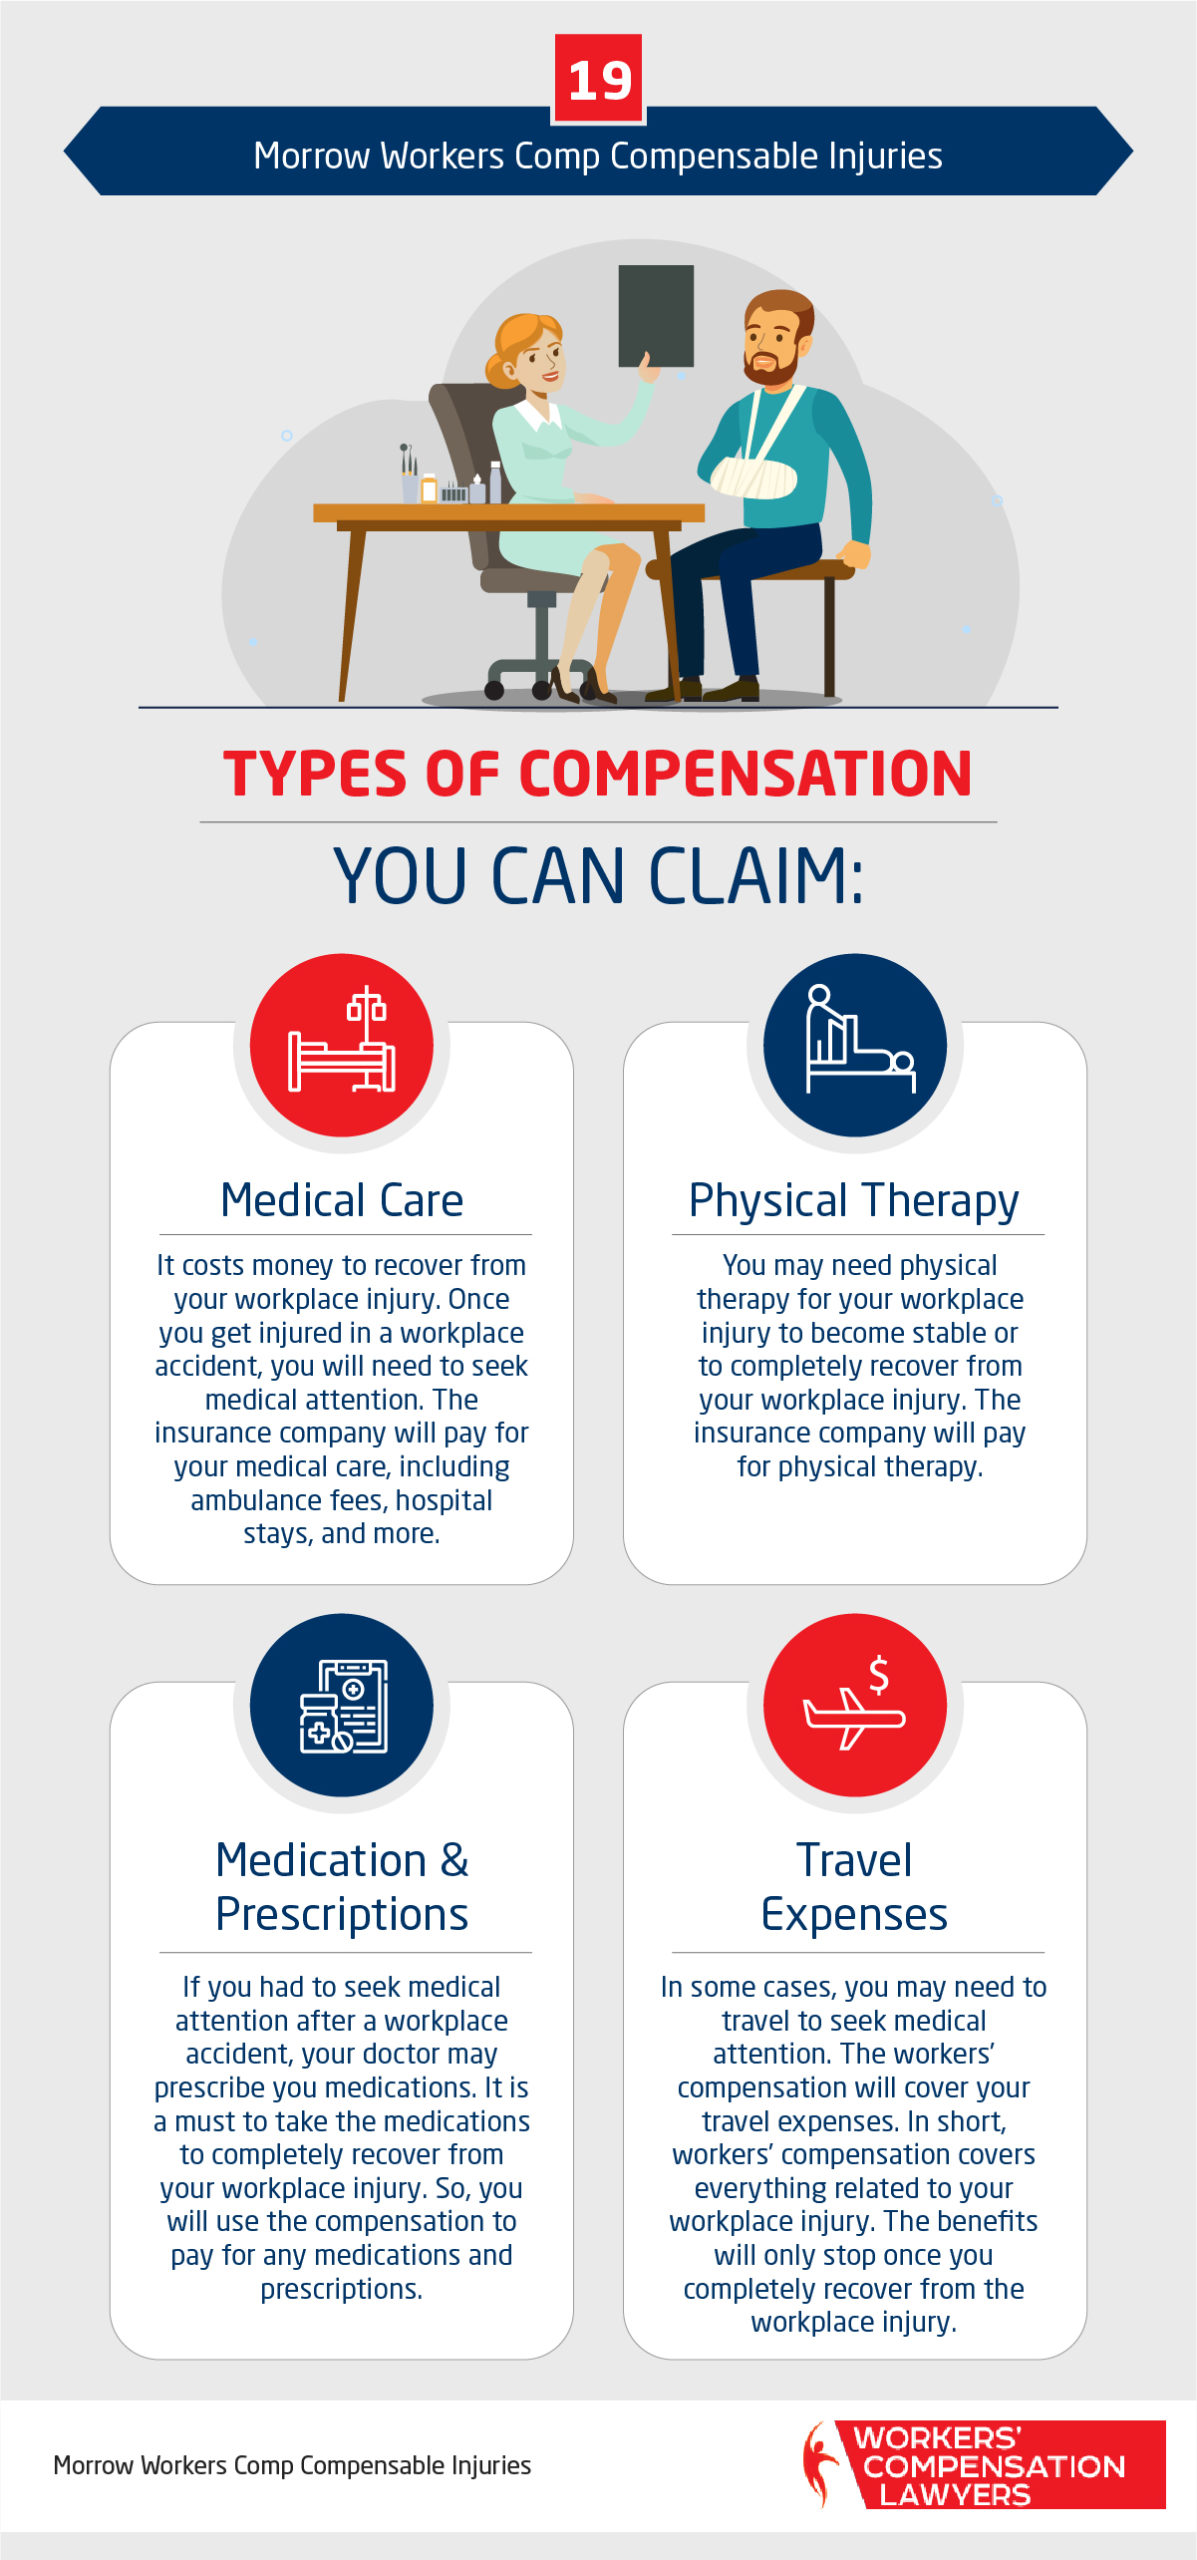 Morrow Workers Compensation Compensable Injury Infographic